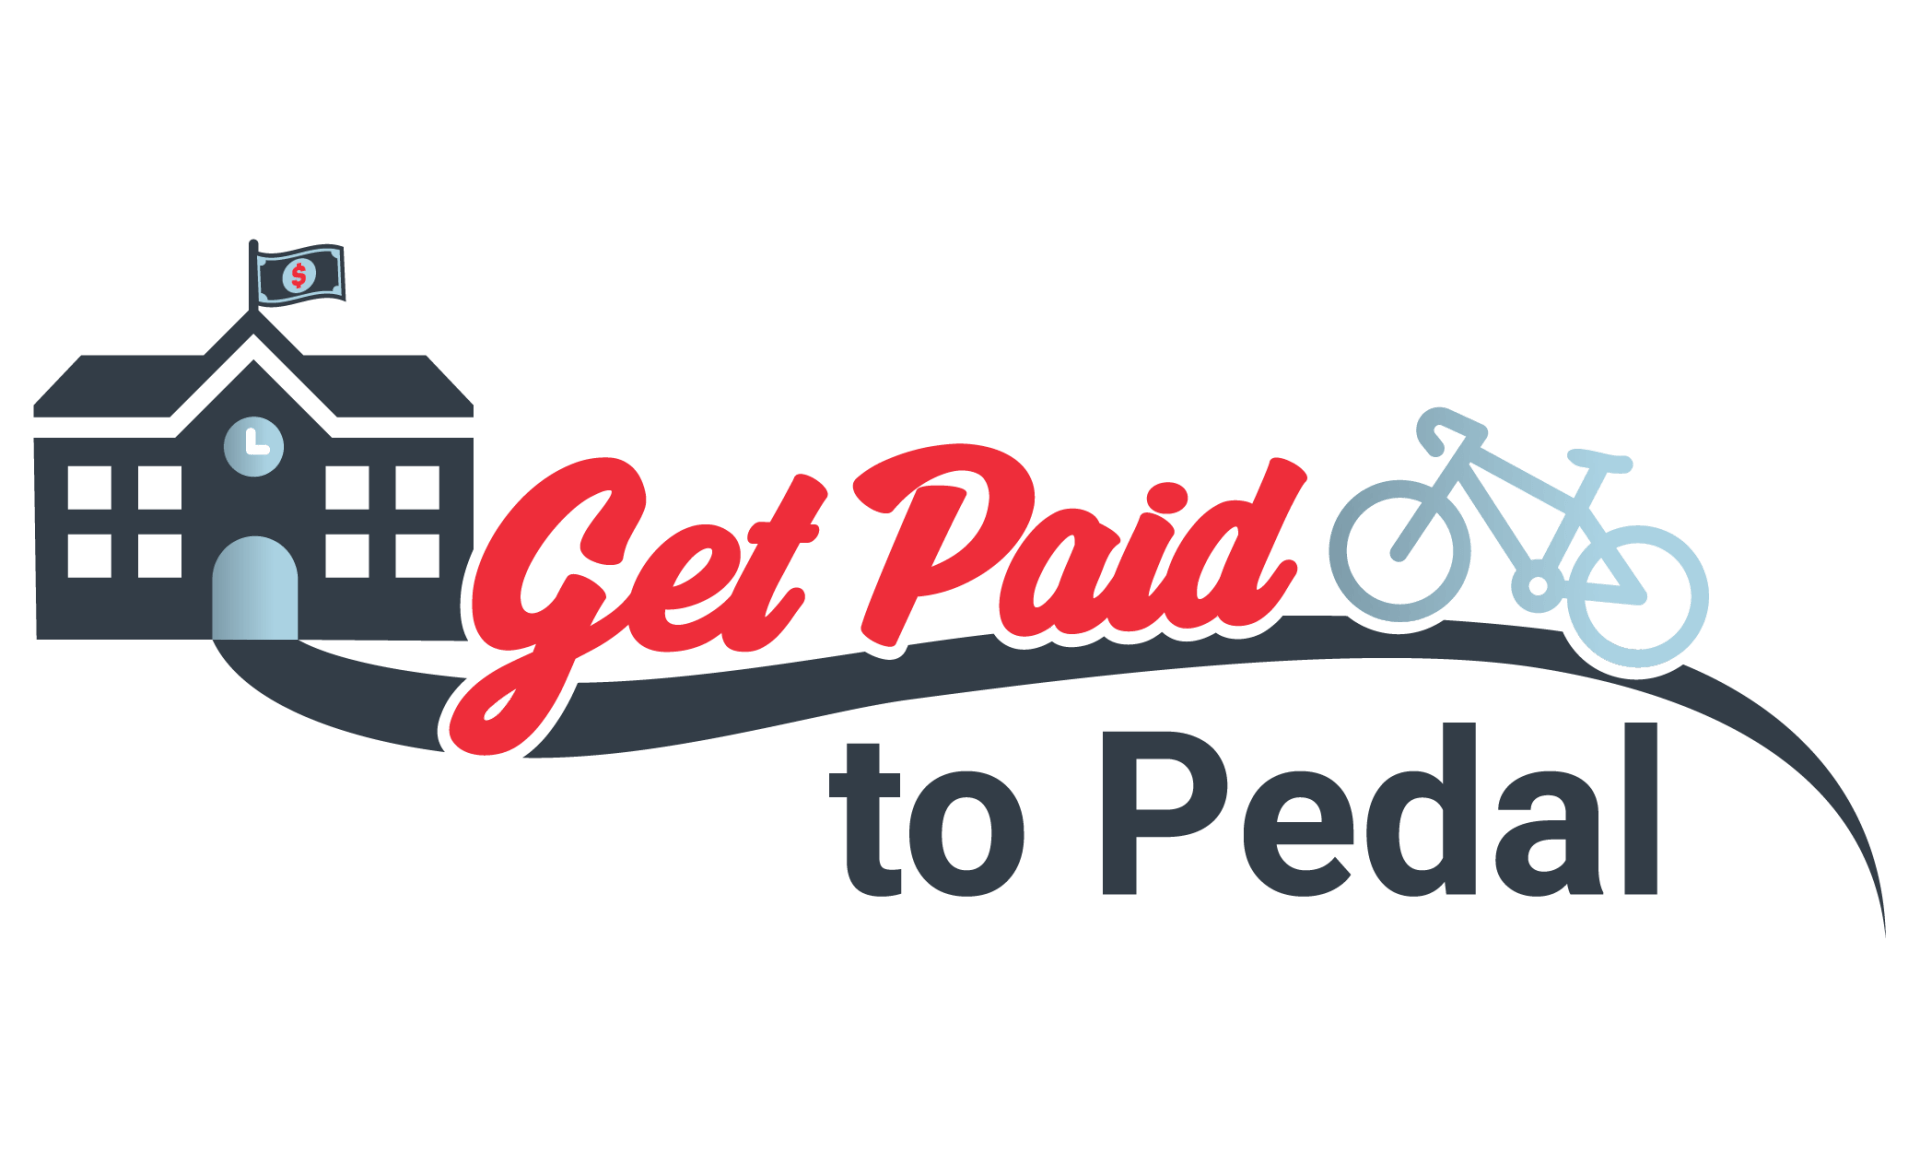 Get Paid to Pedal is Back!